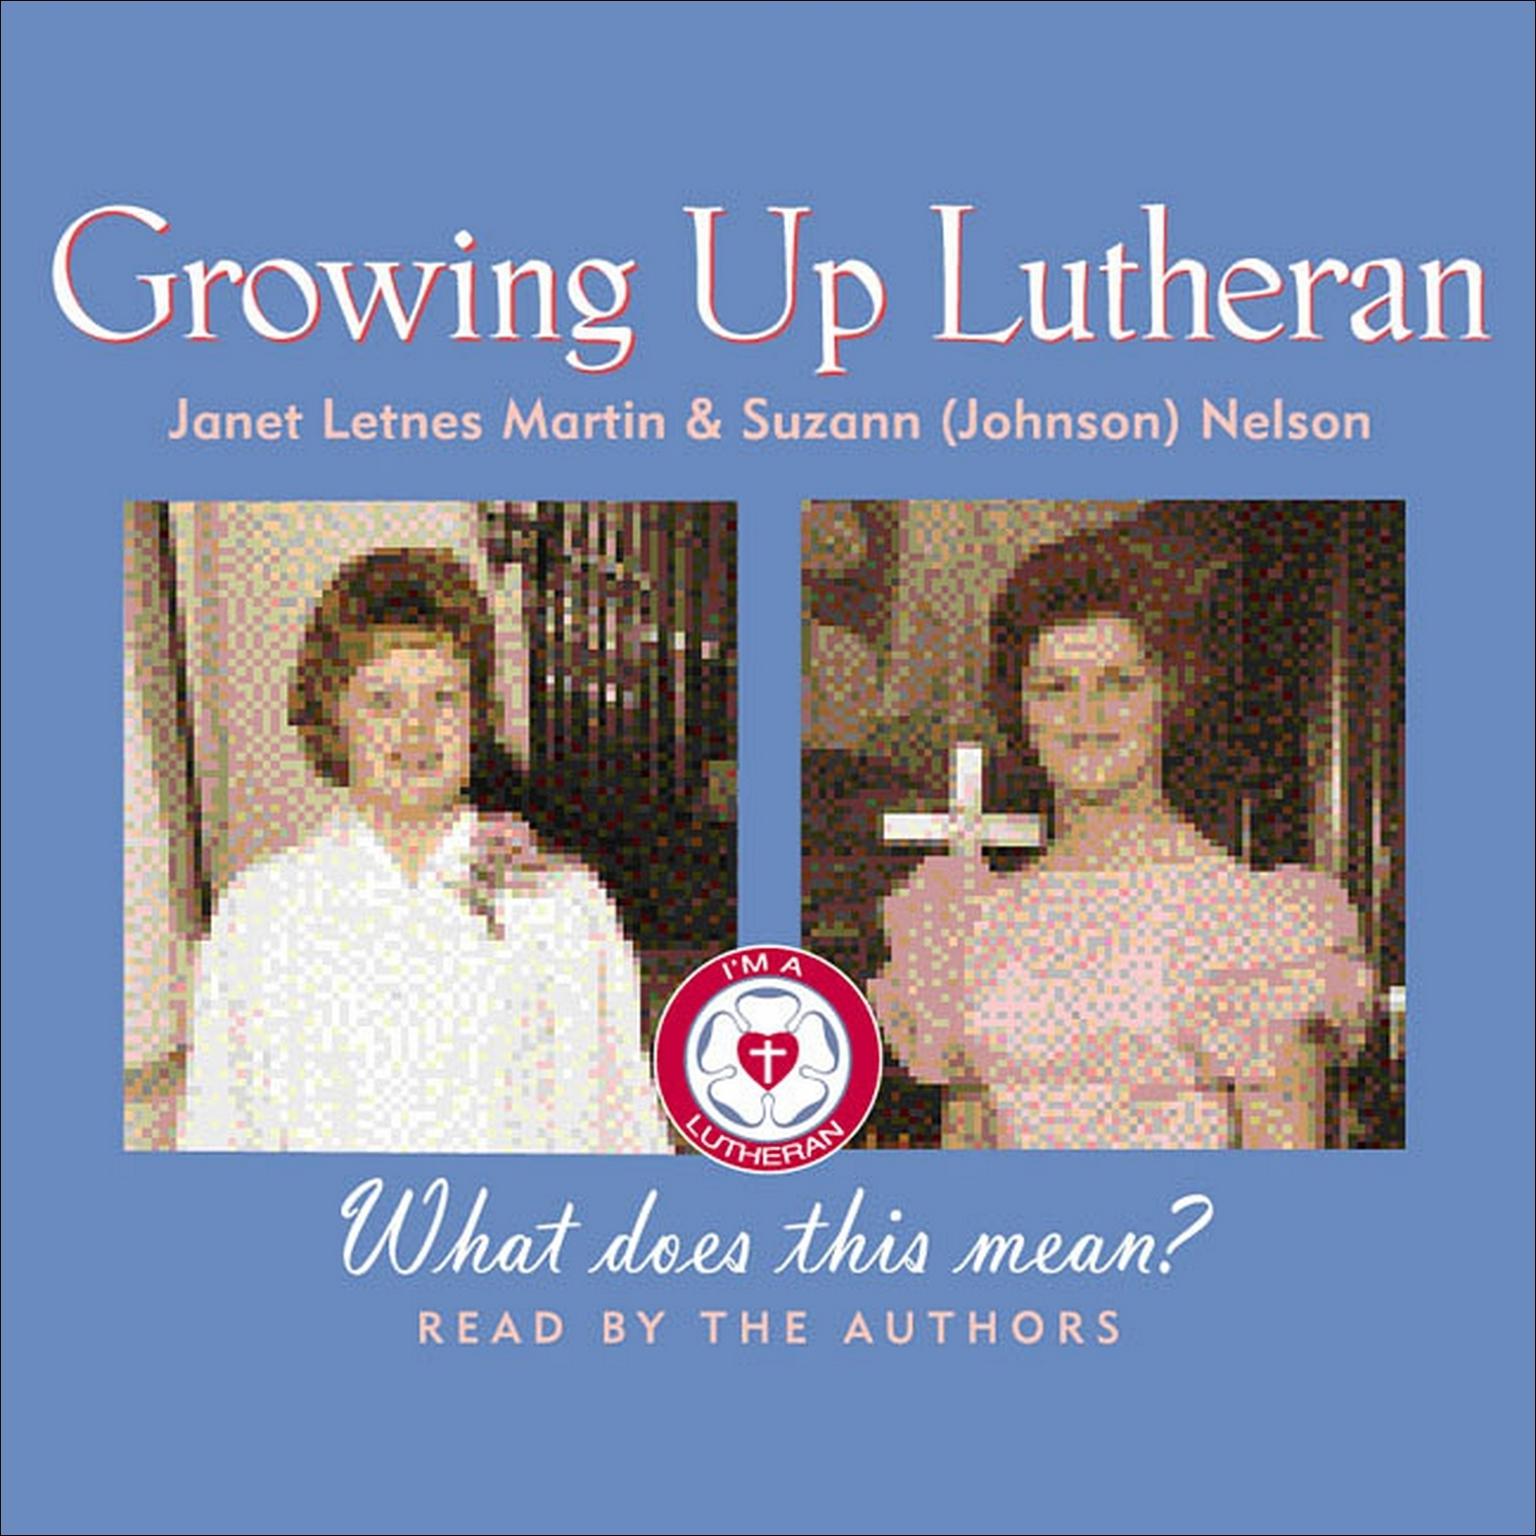 Growing Up Lutheran (Abridged): What Does This Mean? Audiobook, by Janet Letnes Martin